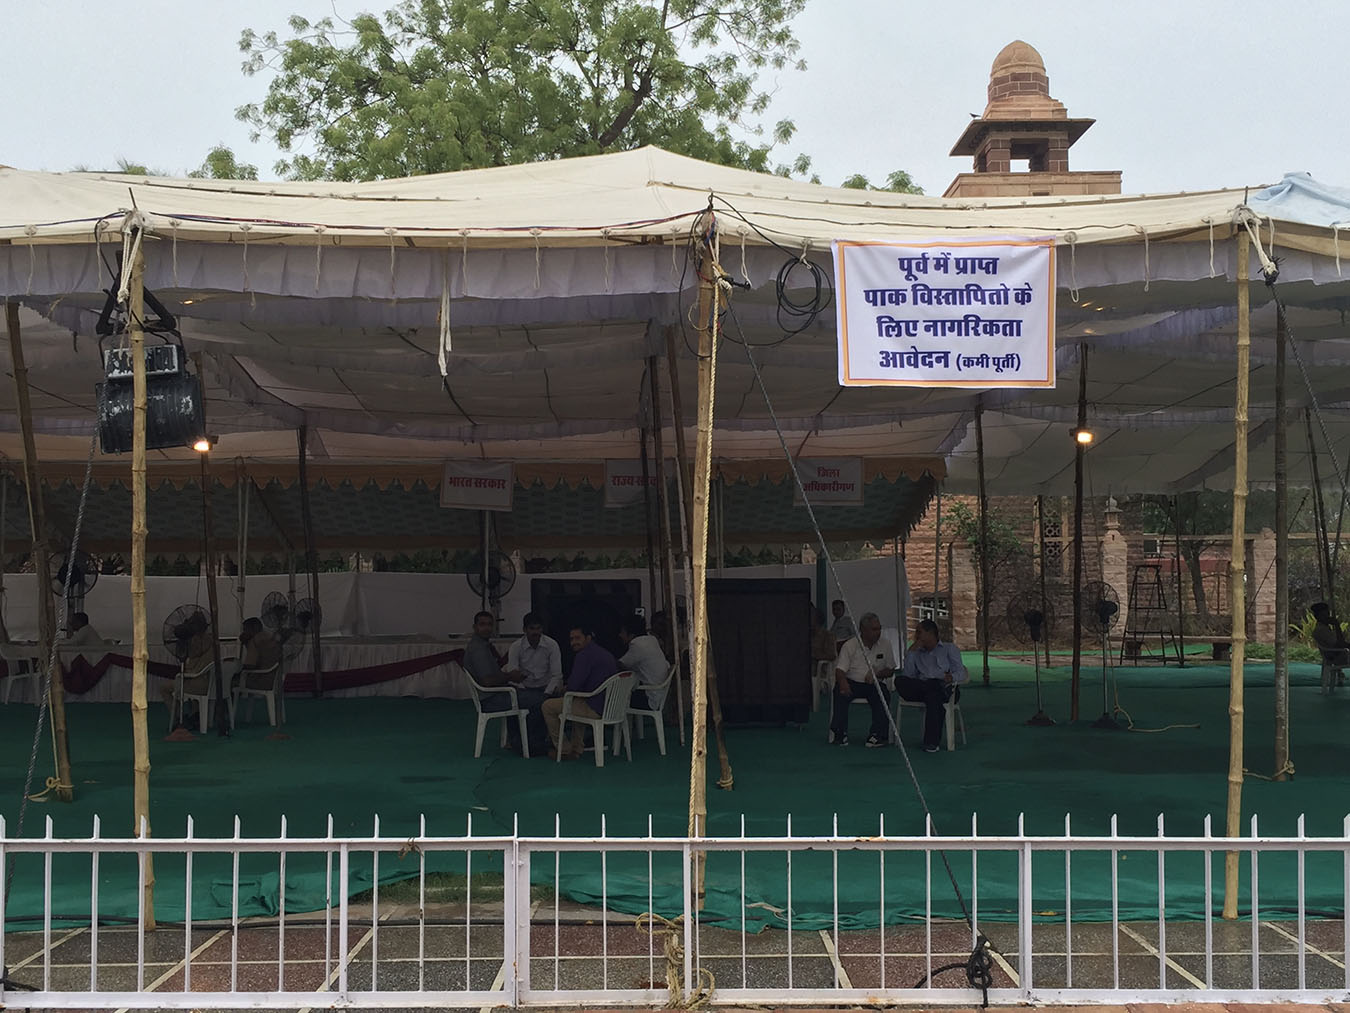 Sign for “Pending Pakistani Displaced People’s Citizenship Applications” hanging from tent top. Photo by Natasha Raheja.